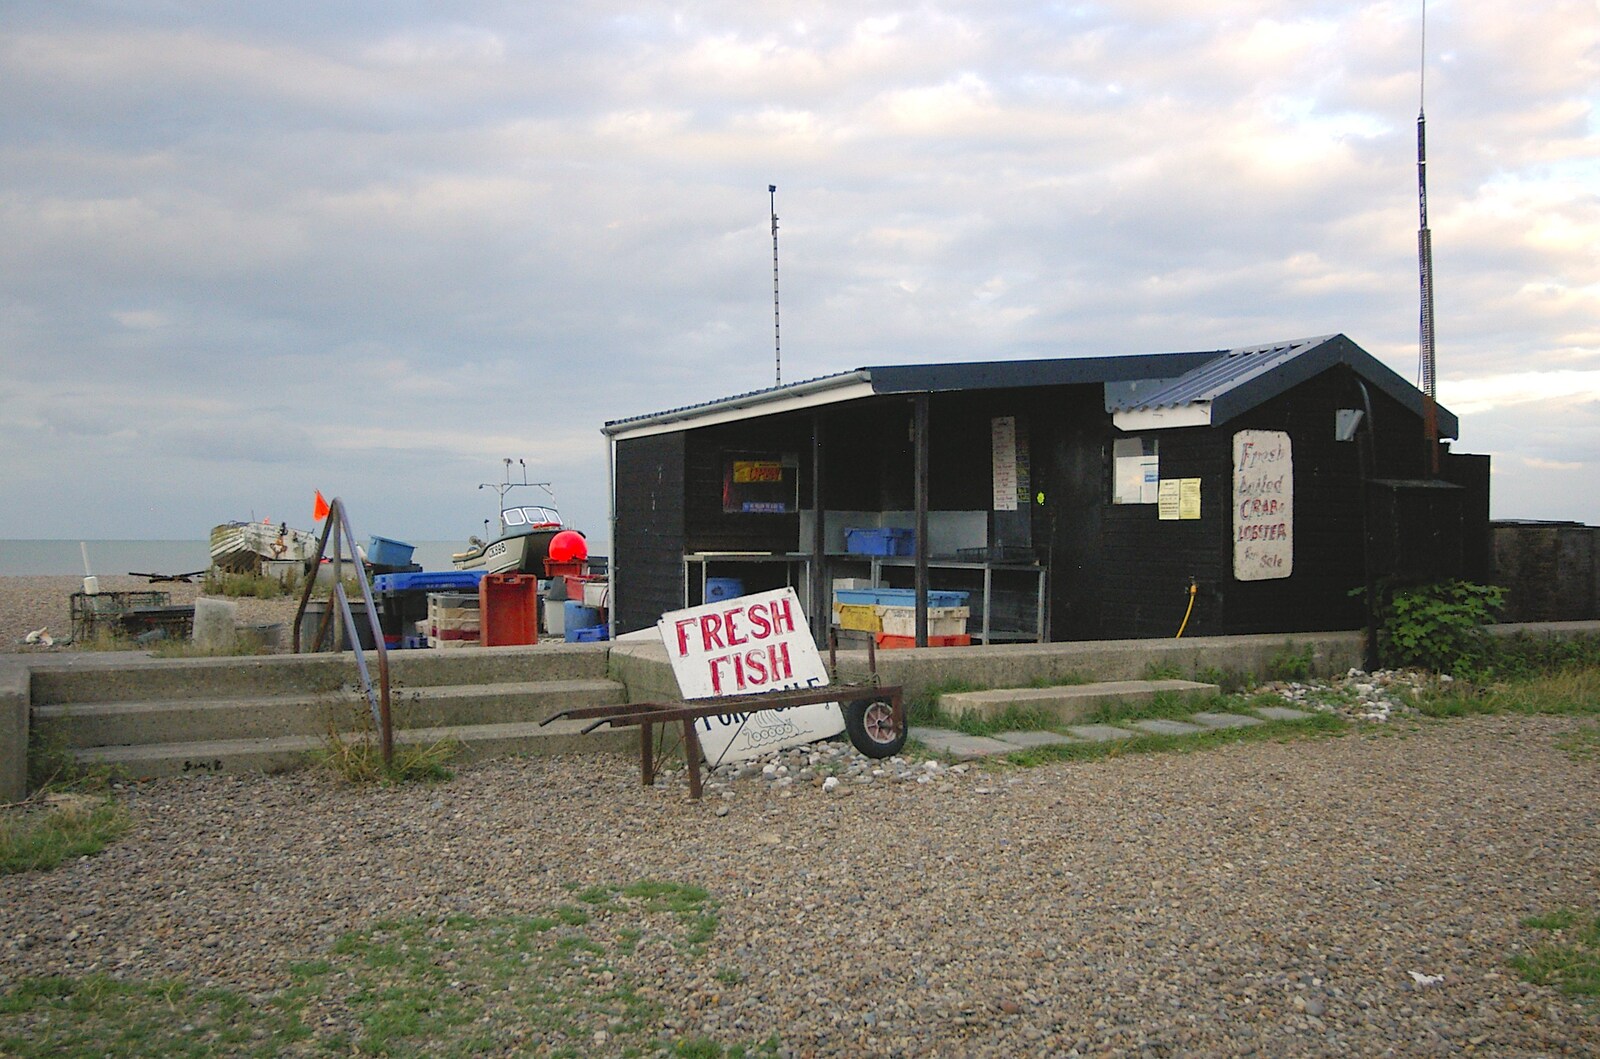 The fresh fish shed from The Regatta Restaurant with Mother and Mike, Aldeburgh, Suffolk - 10th August 2006